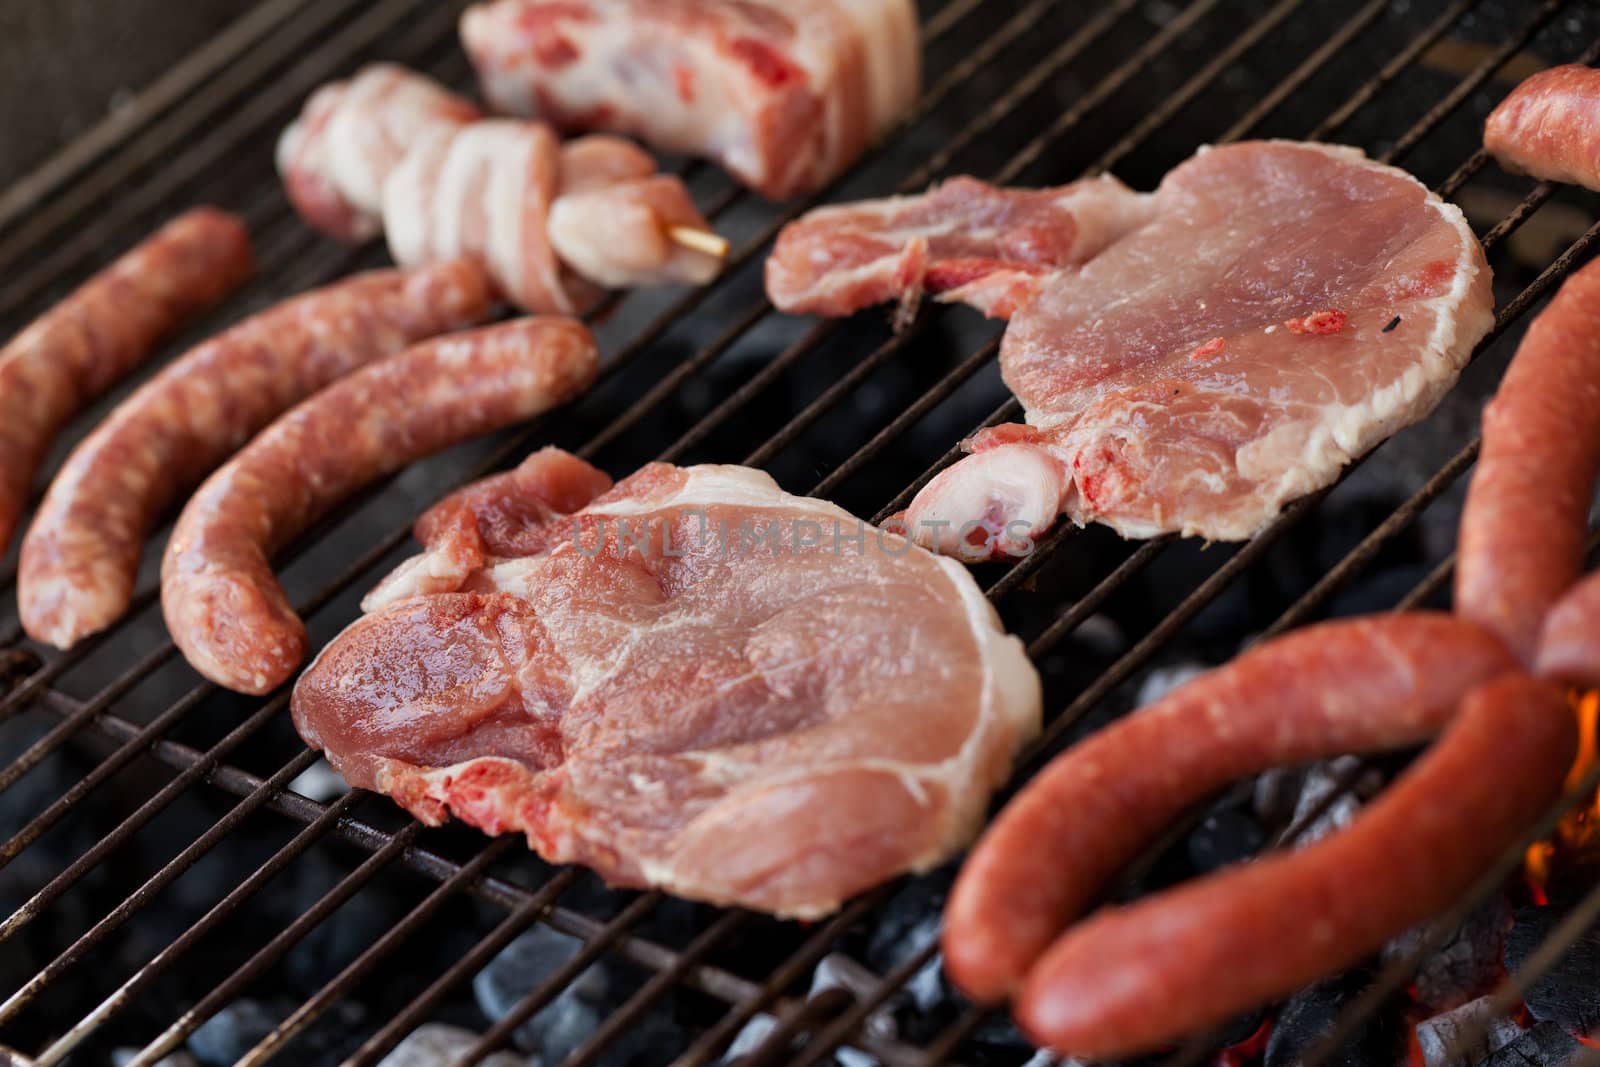 Several type of meats being cooked on a barbecue